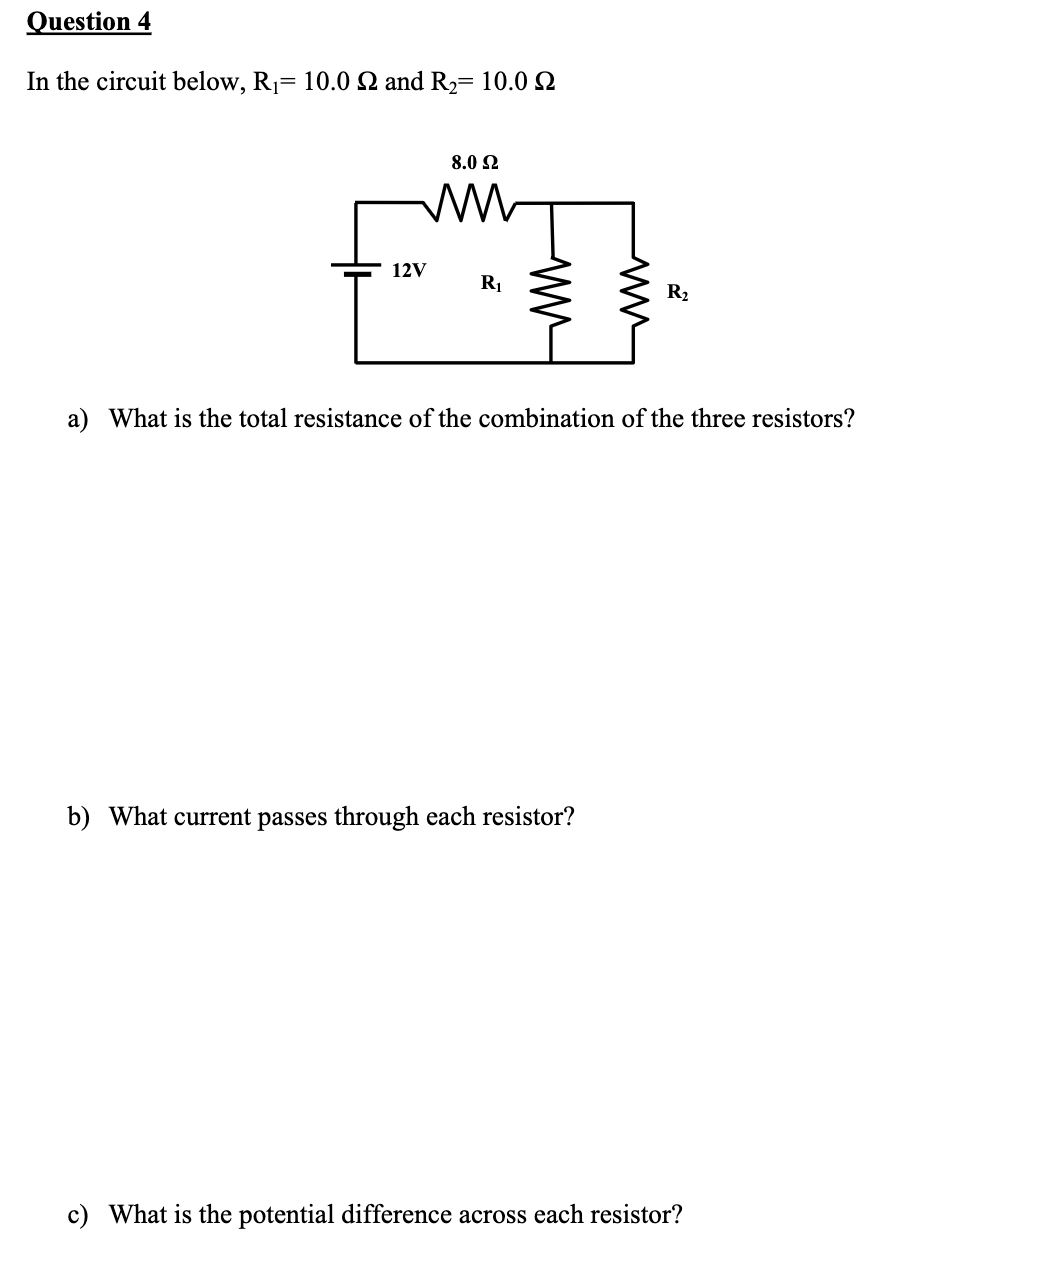 Question 4
In the circuit below, R₁10.0 2 and R₂= 10.0
8.0 92
ww
12V
R₁
R₂
a) What is the total resistance of the combination of the three resistors?
b) What current passes through each resistor?
c) What is the potential difference across each resistor?